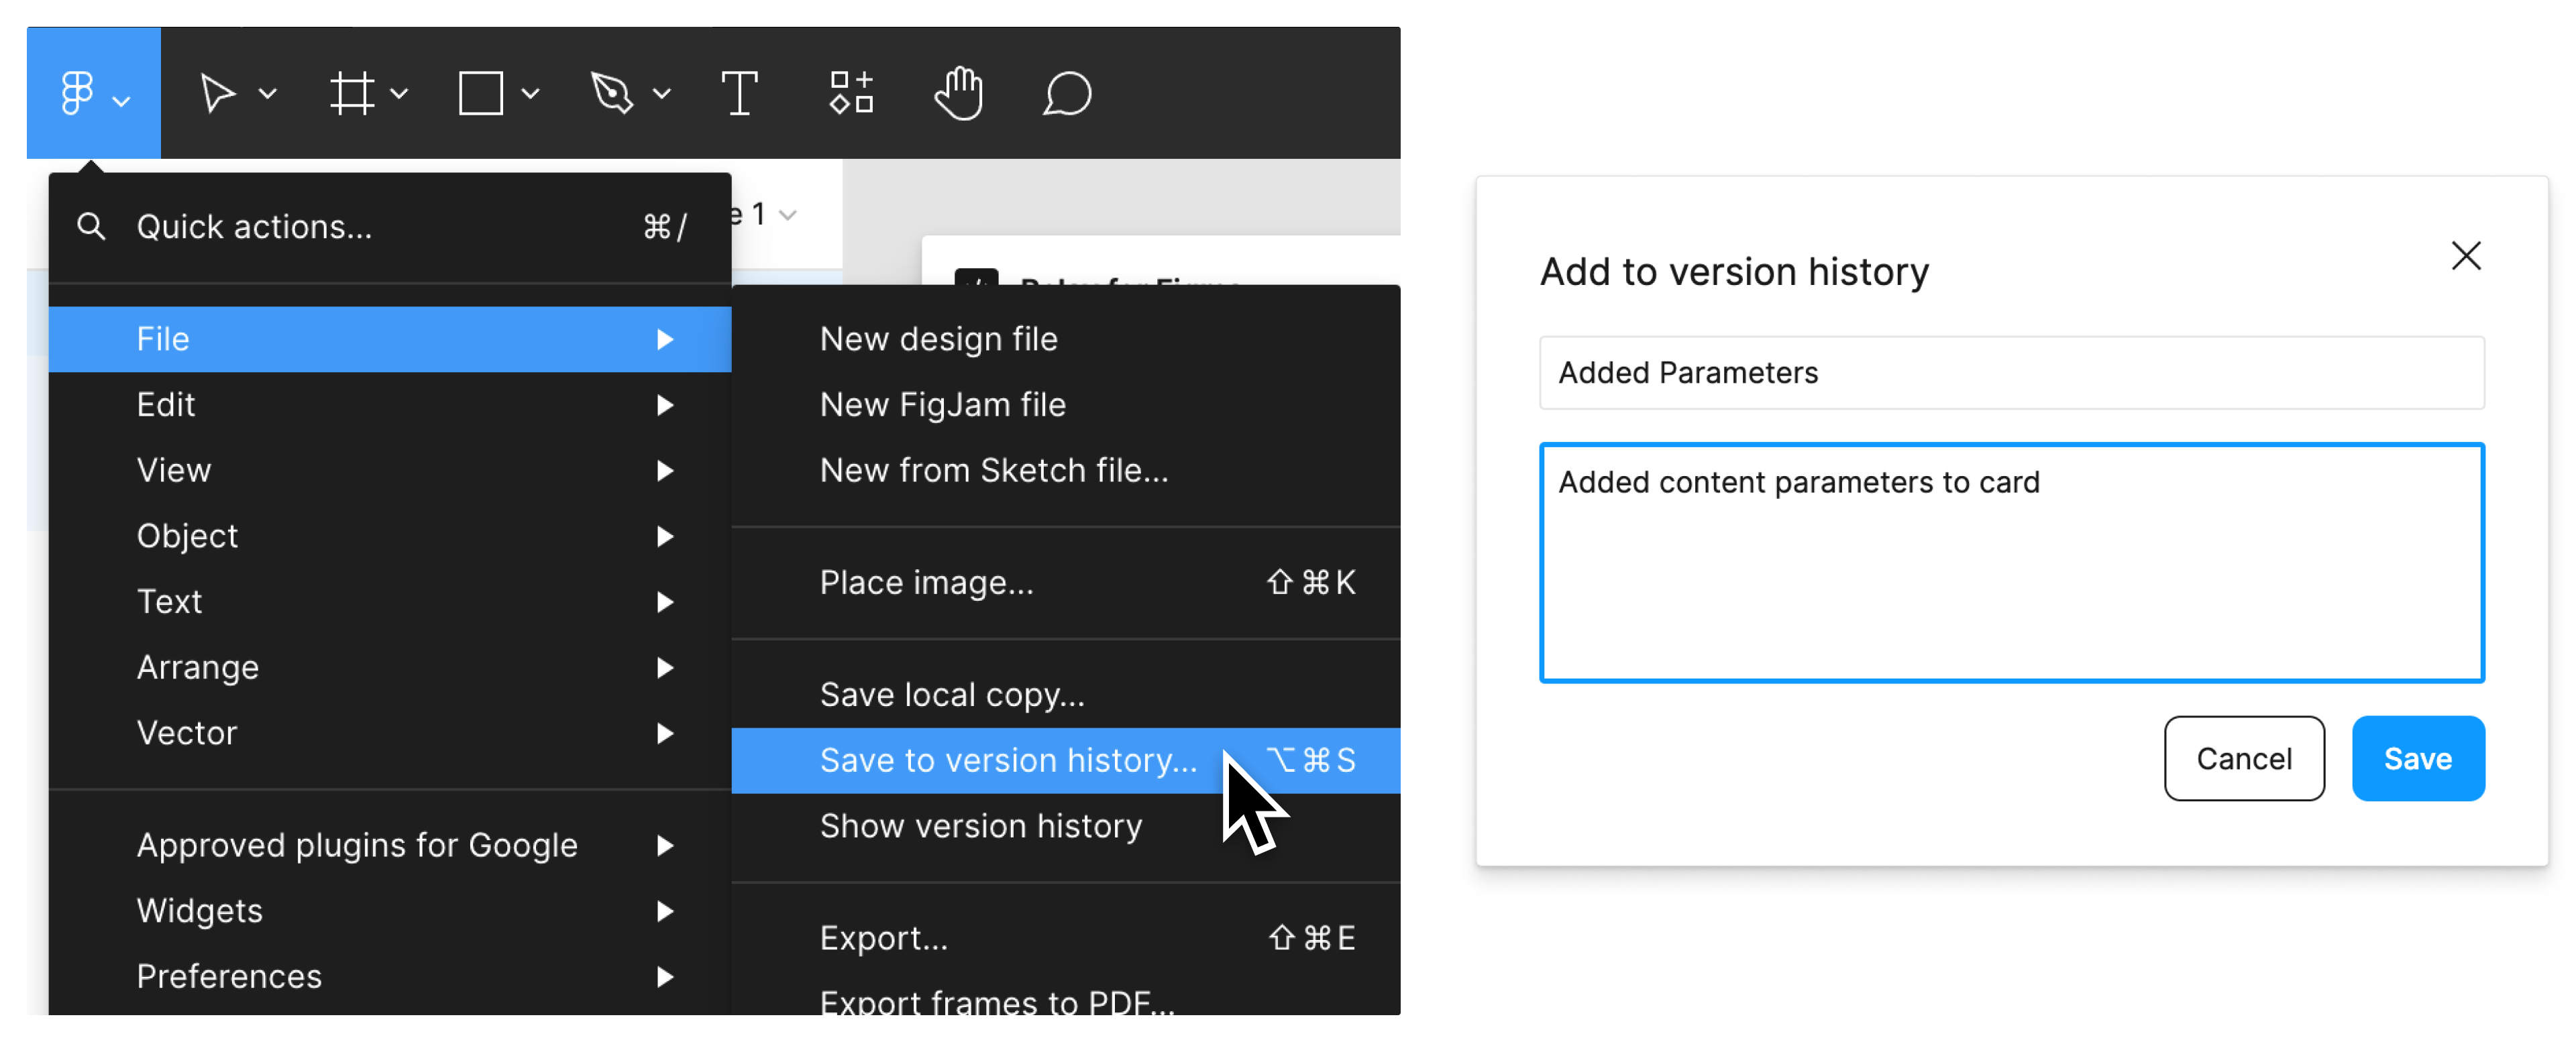 Save to version history option in the menu